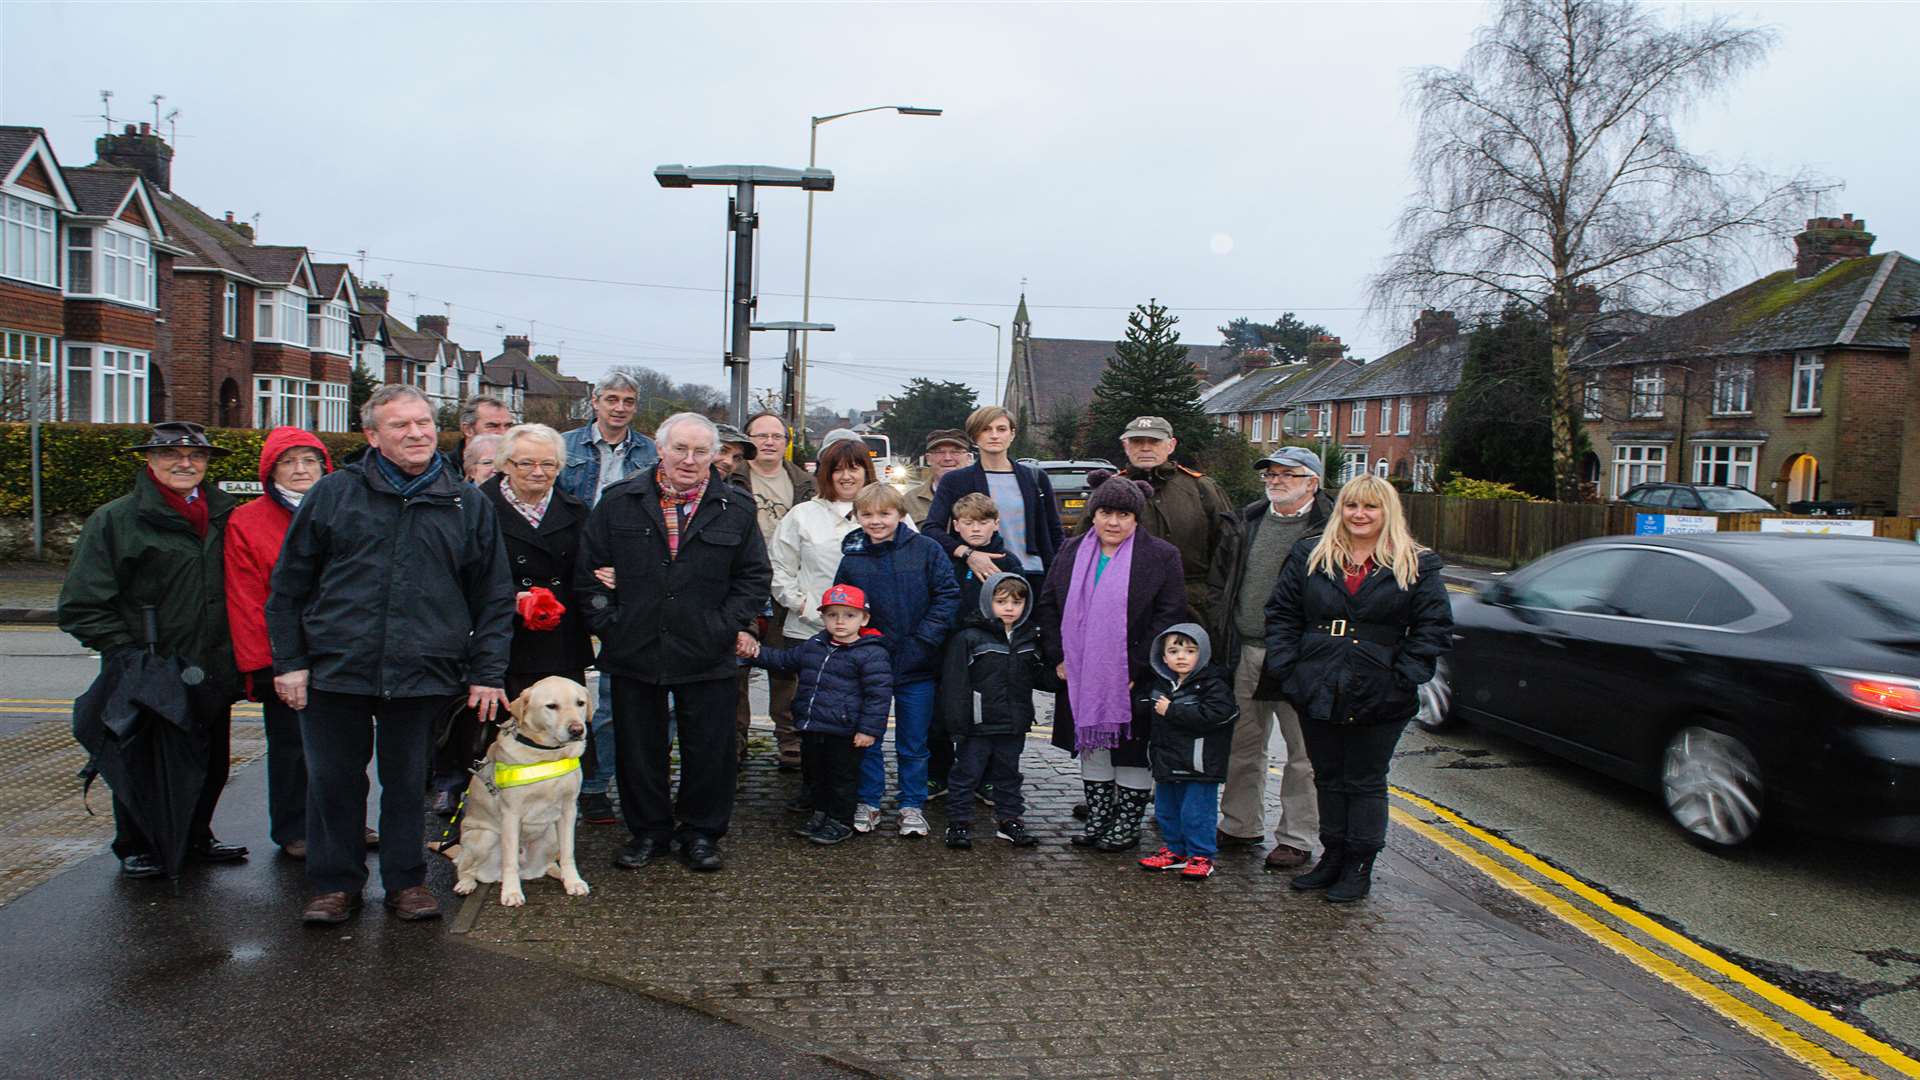 A group of residents are re-launching a campaign to get a pedestrian crossing on the increasingly busy road